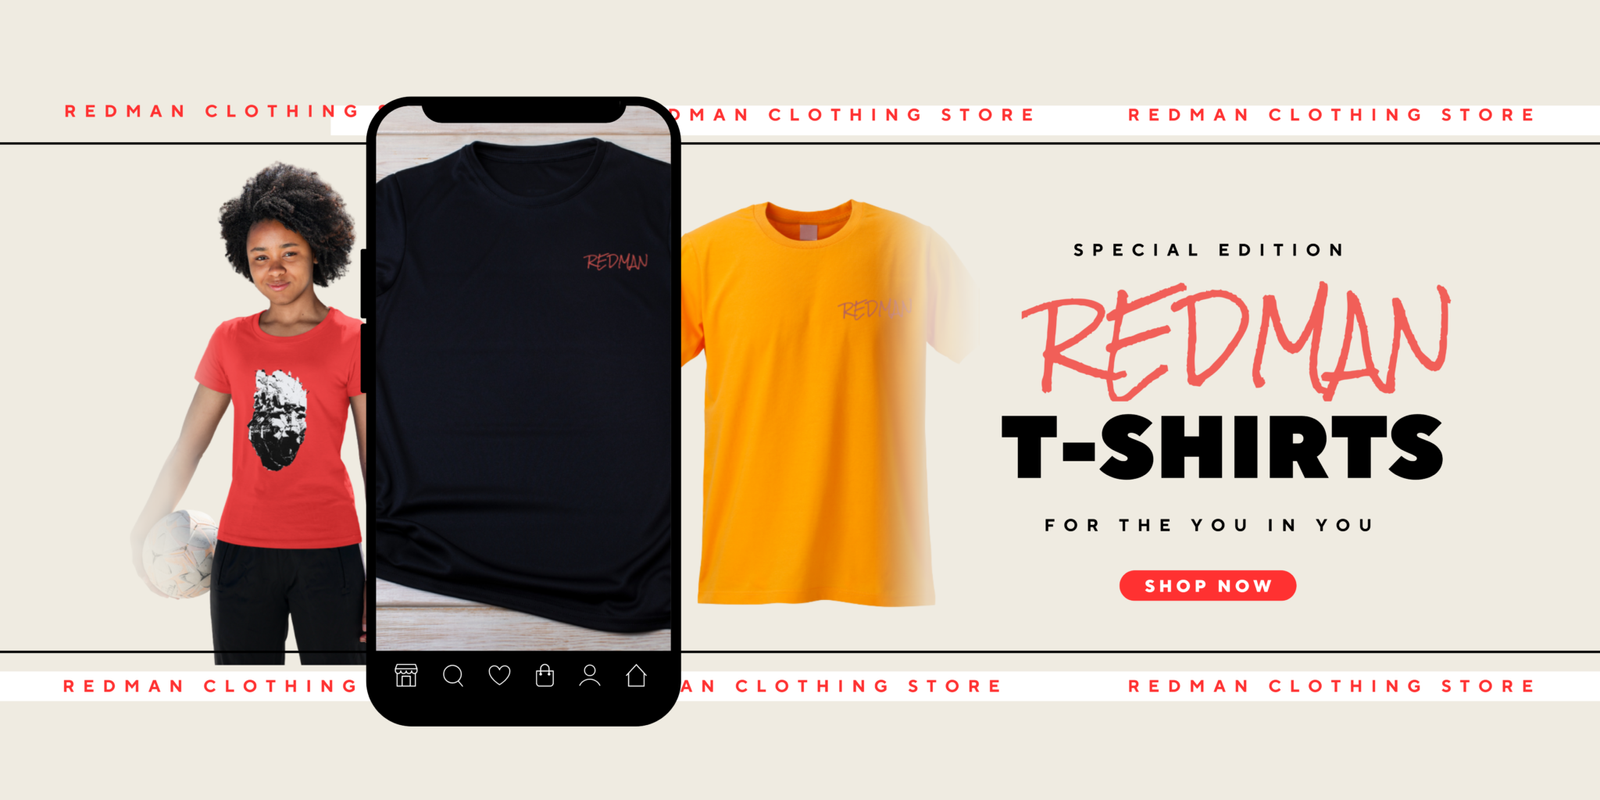 Hoodies, t-shirts, combat shorts, armless shirts, face caps, joggers, online clothing store, Abuja fashion, Nigerian streetwear, casual wear, African apparel, urban fashion, Abuja clothing store, men's fashion, trendy outfits, fashion essentials.